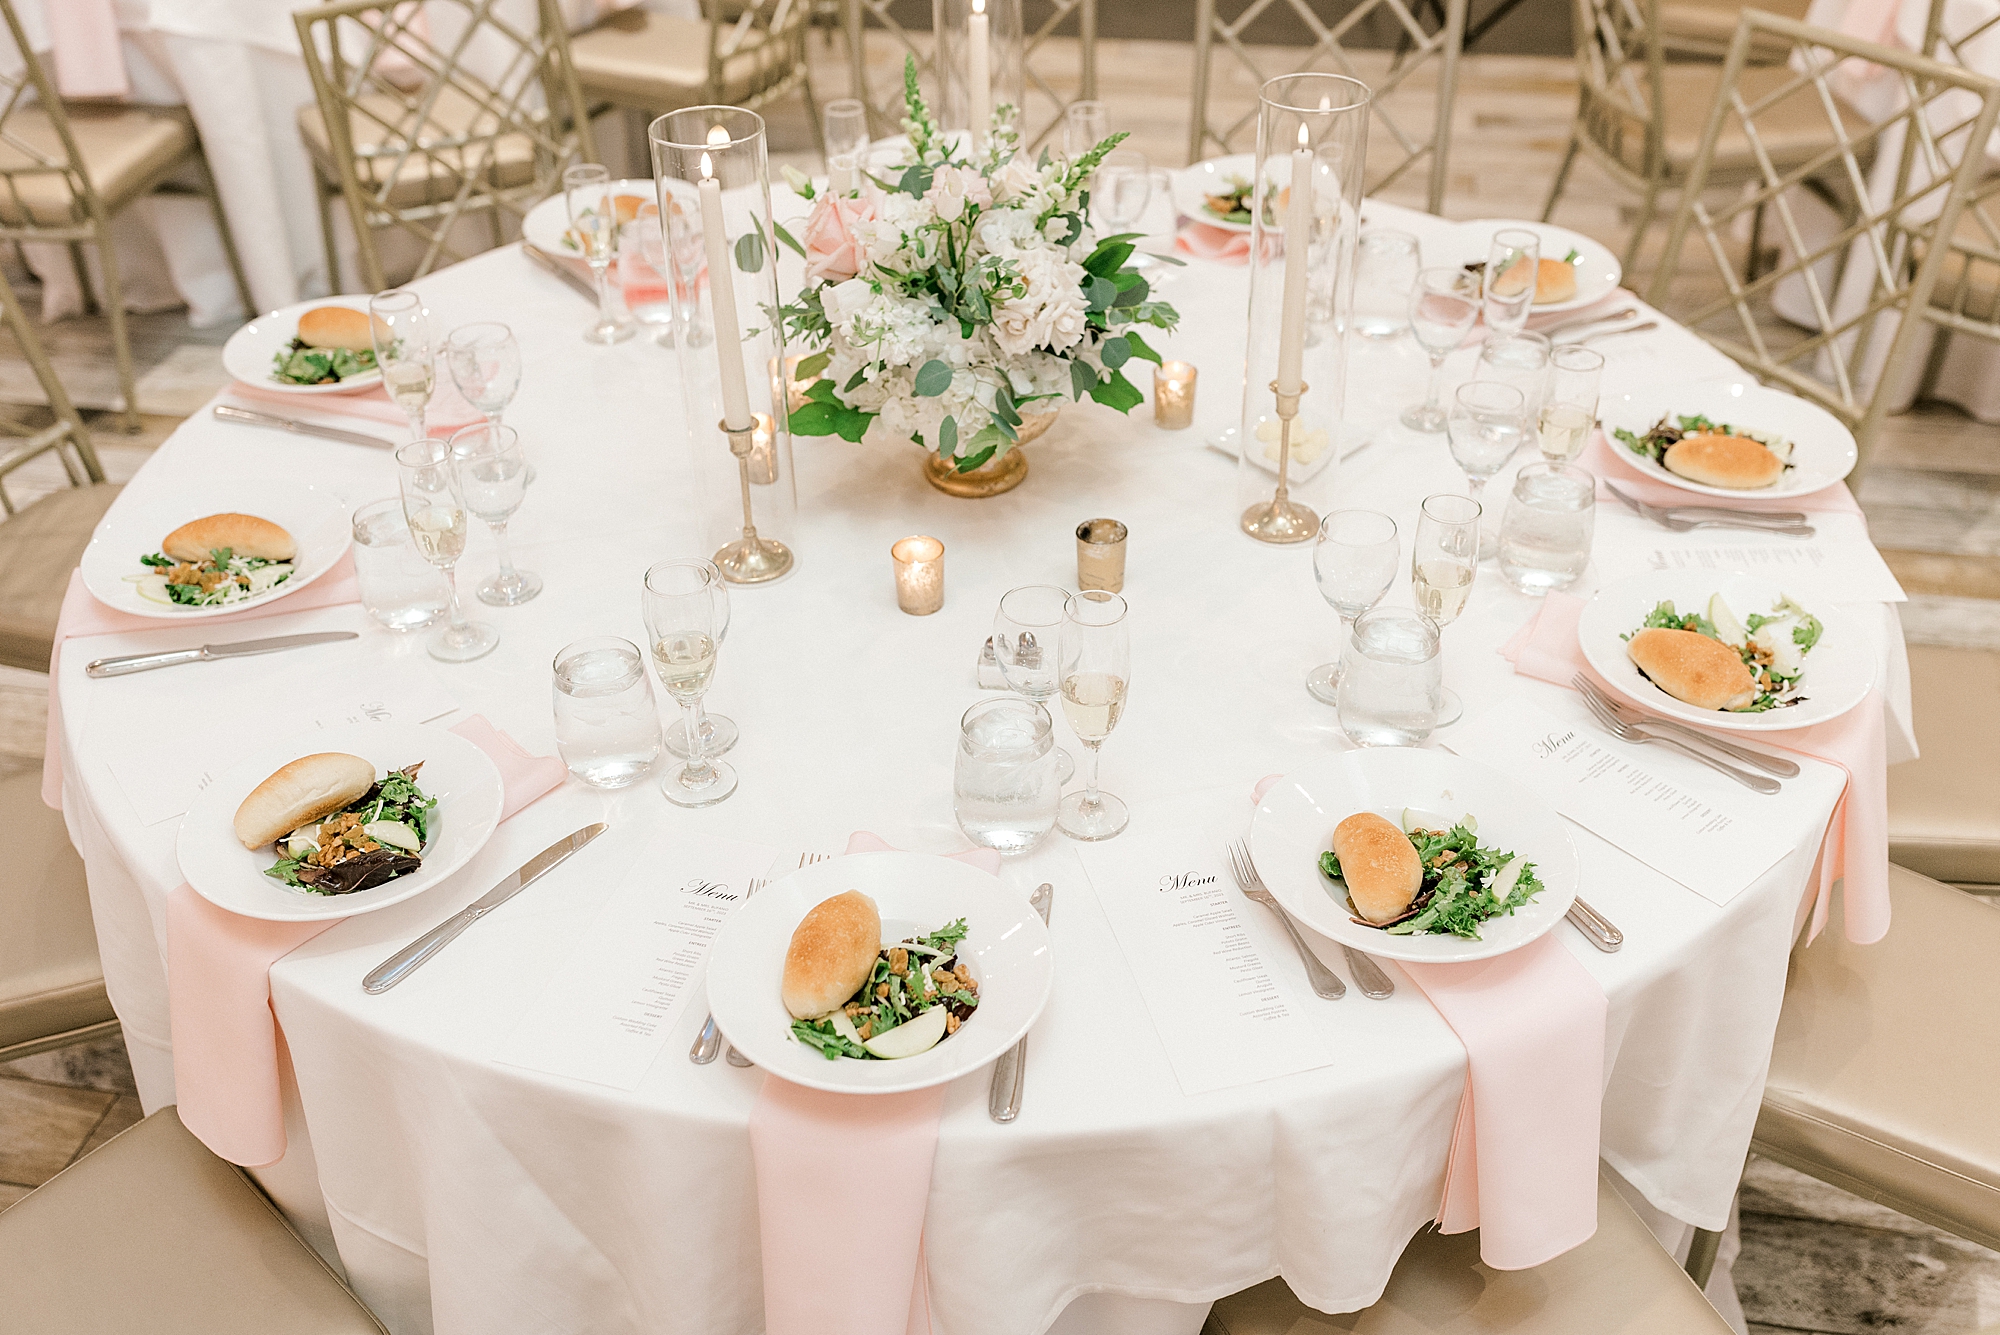 place setting for summer wedding reception at the Farmhouse with gold and white details